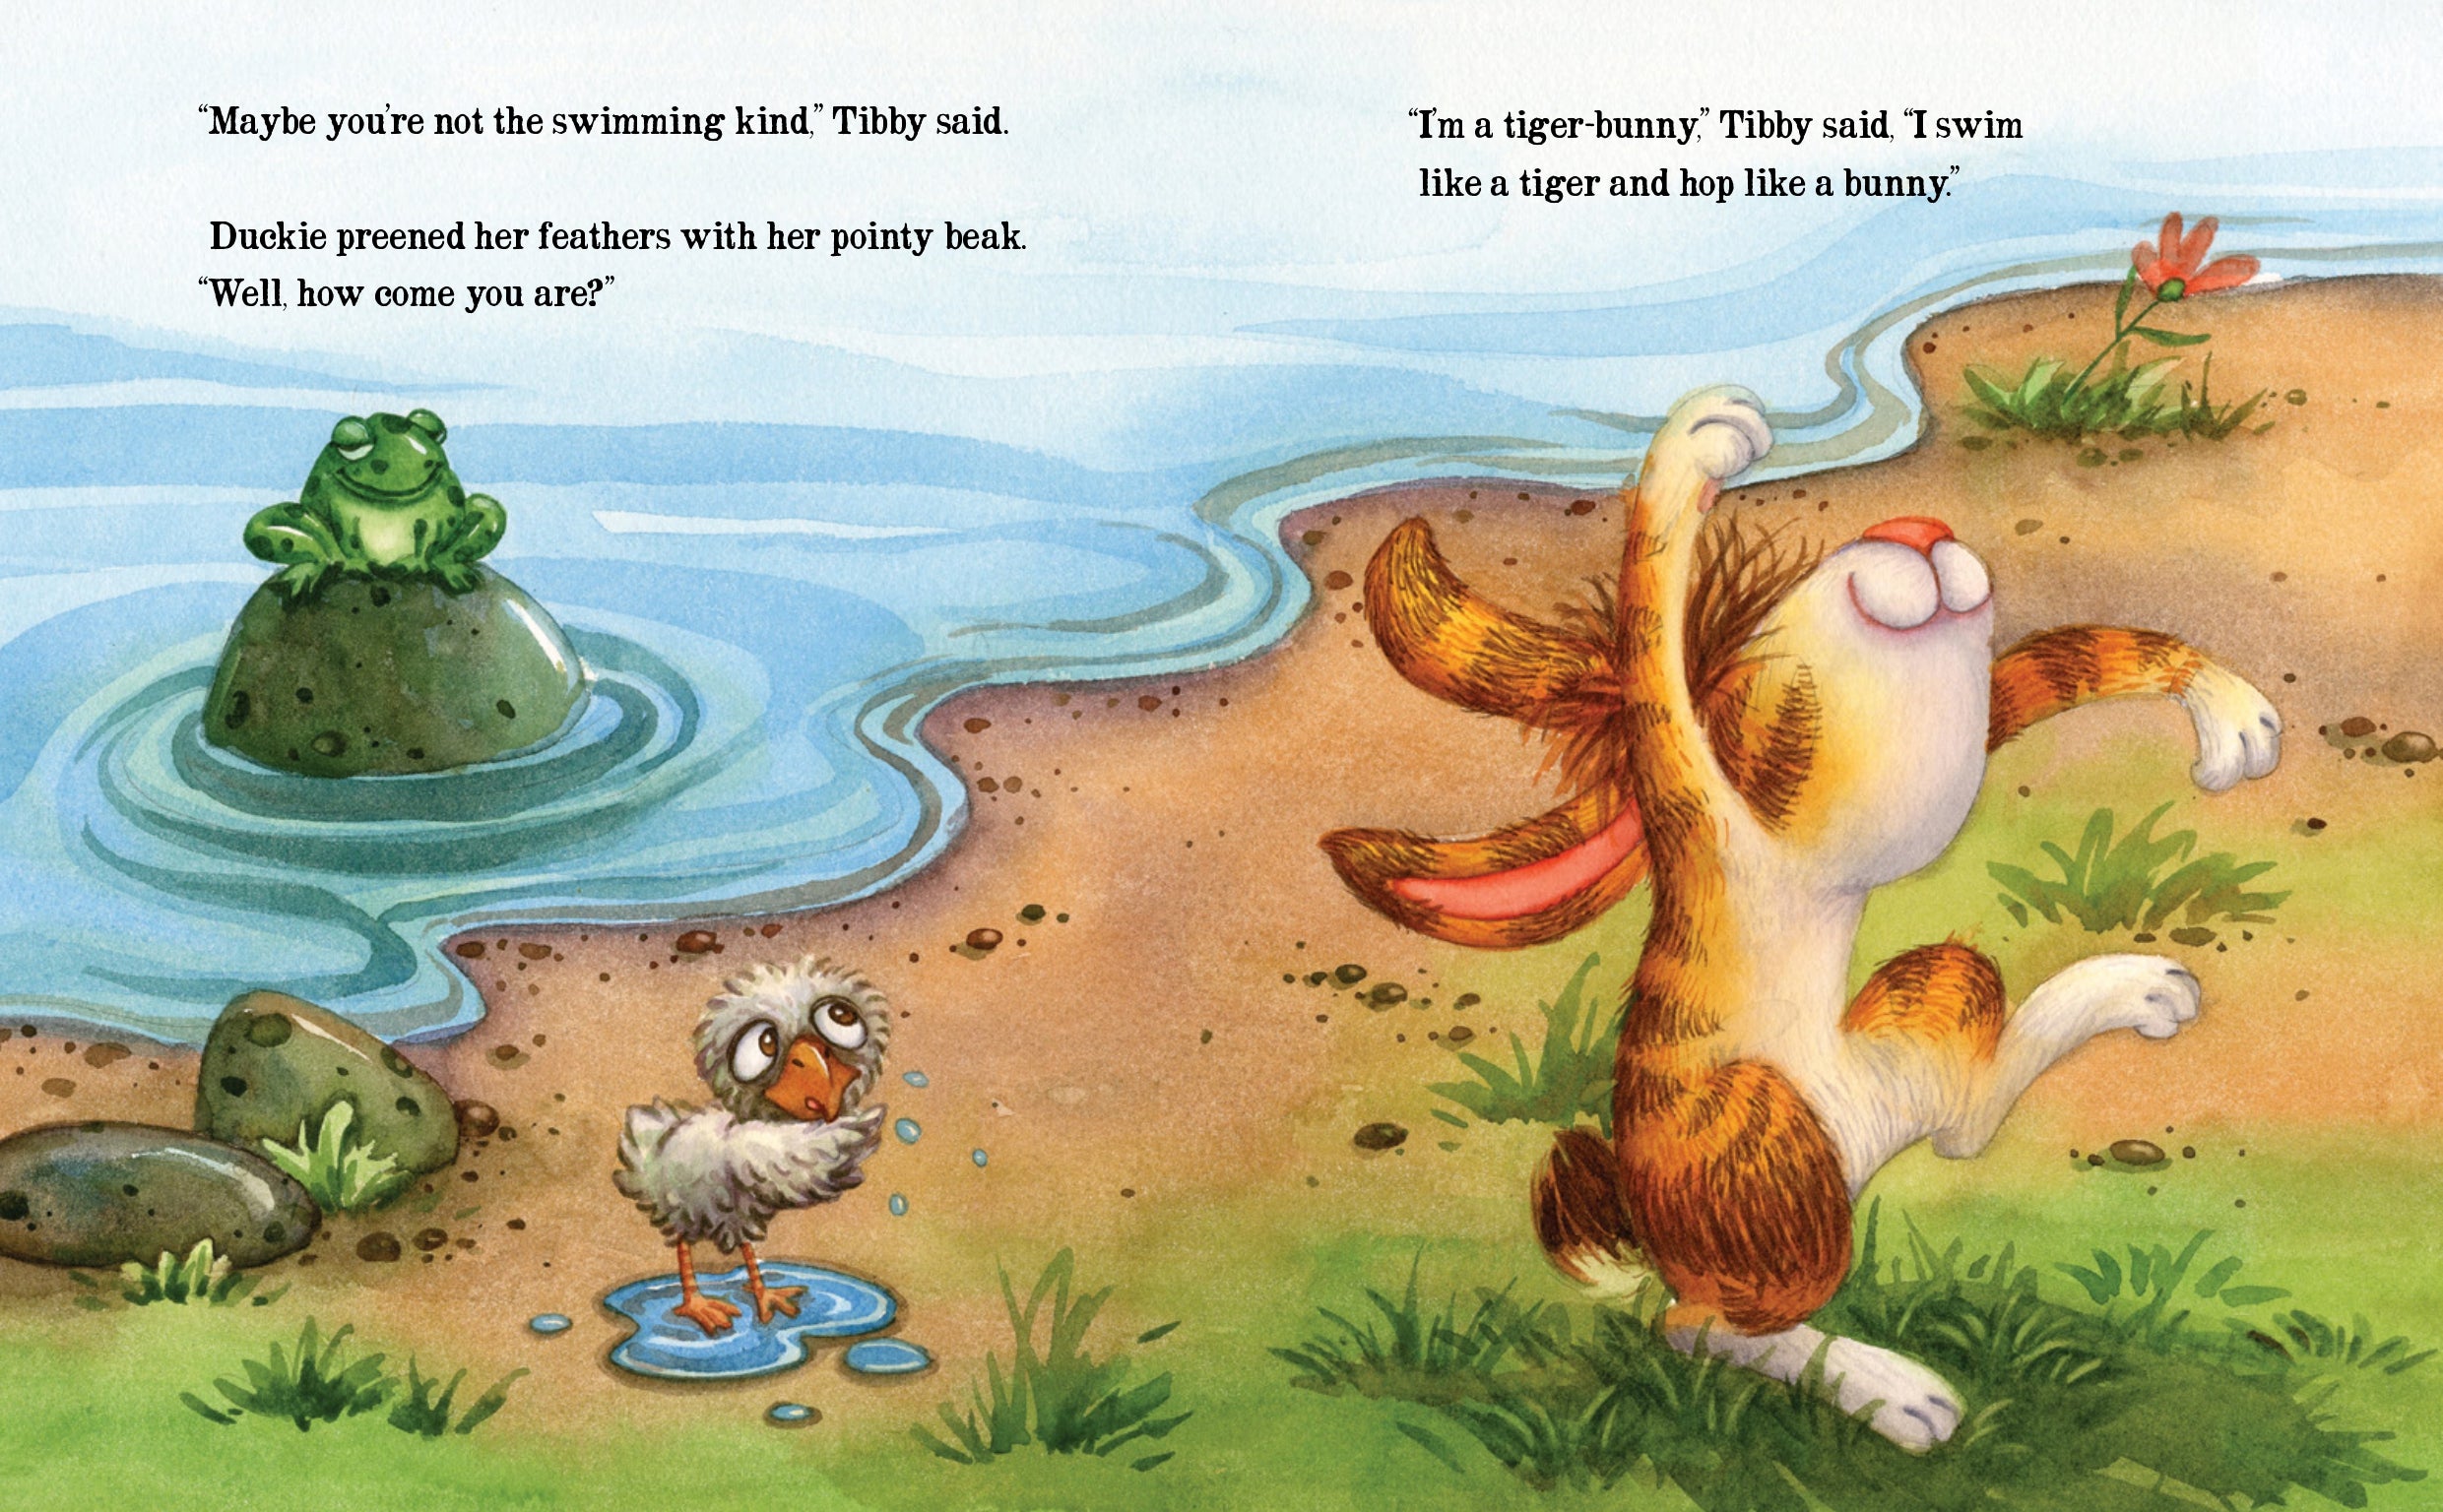 Tibby and Duckie (book 2)